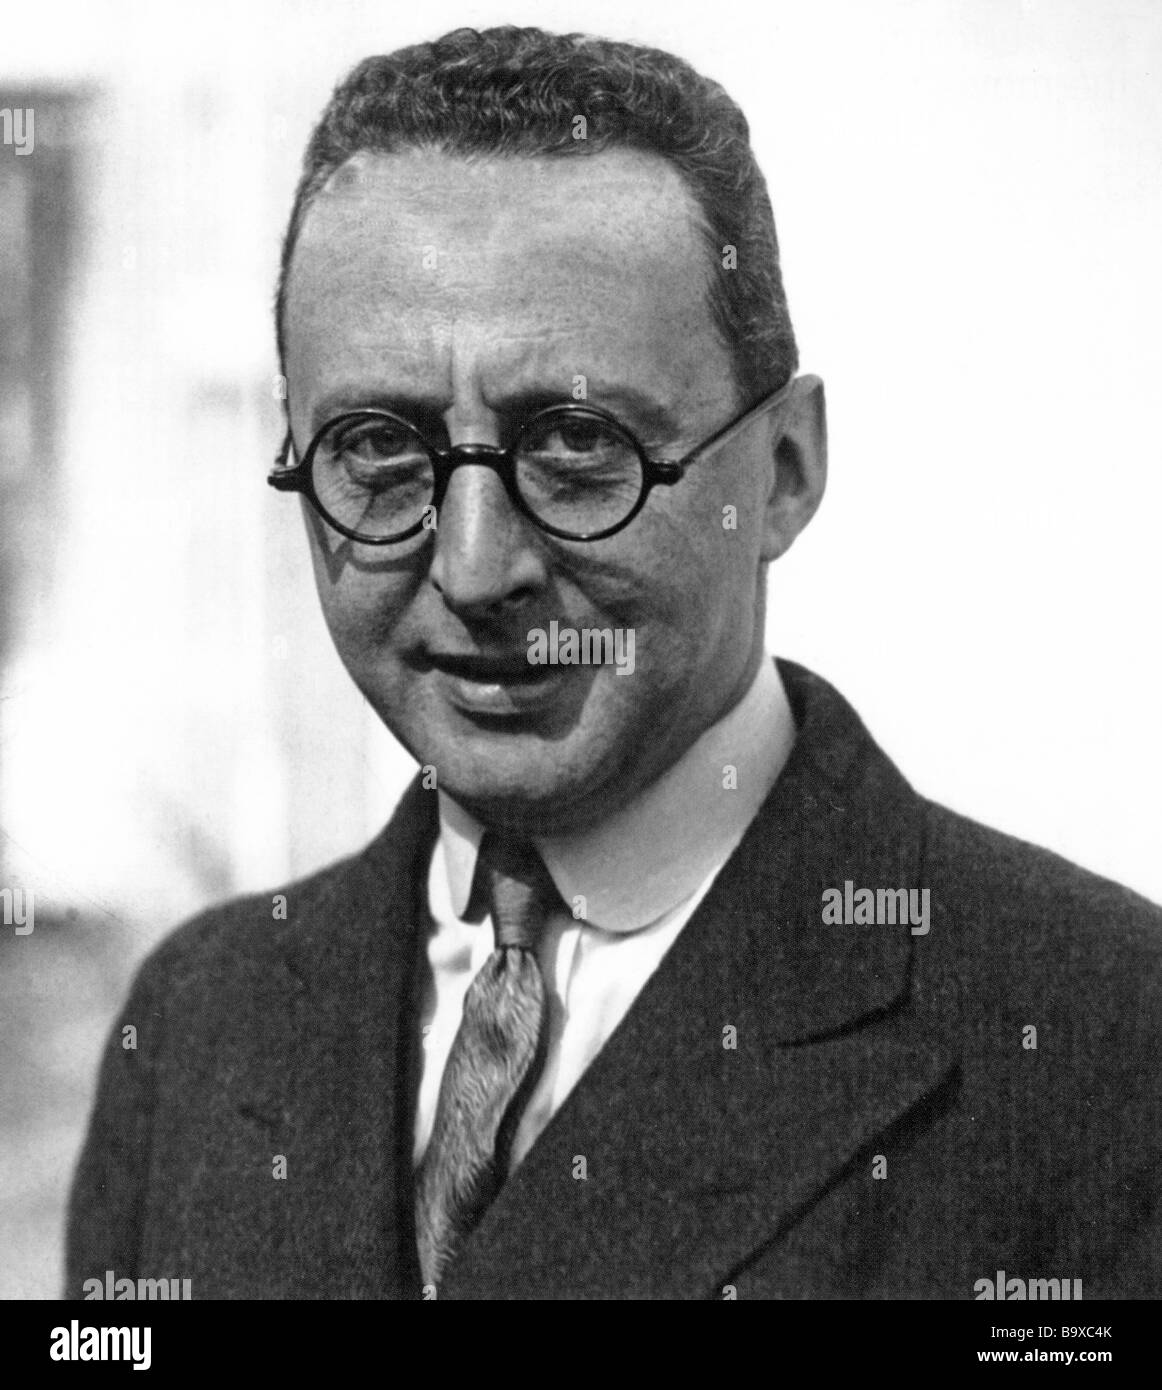 JEROME KERN - US composer (1885 to 1945) Stock Photo